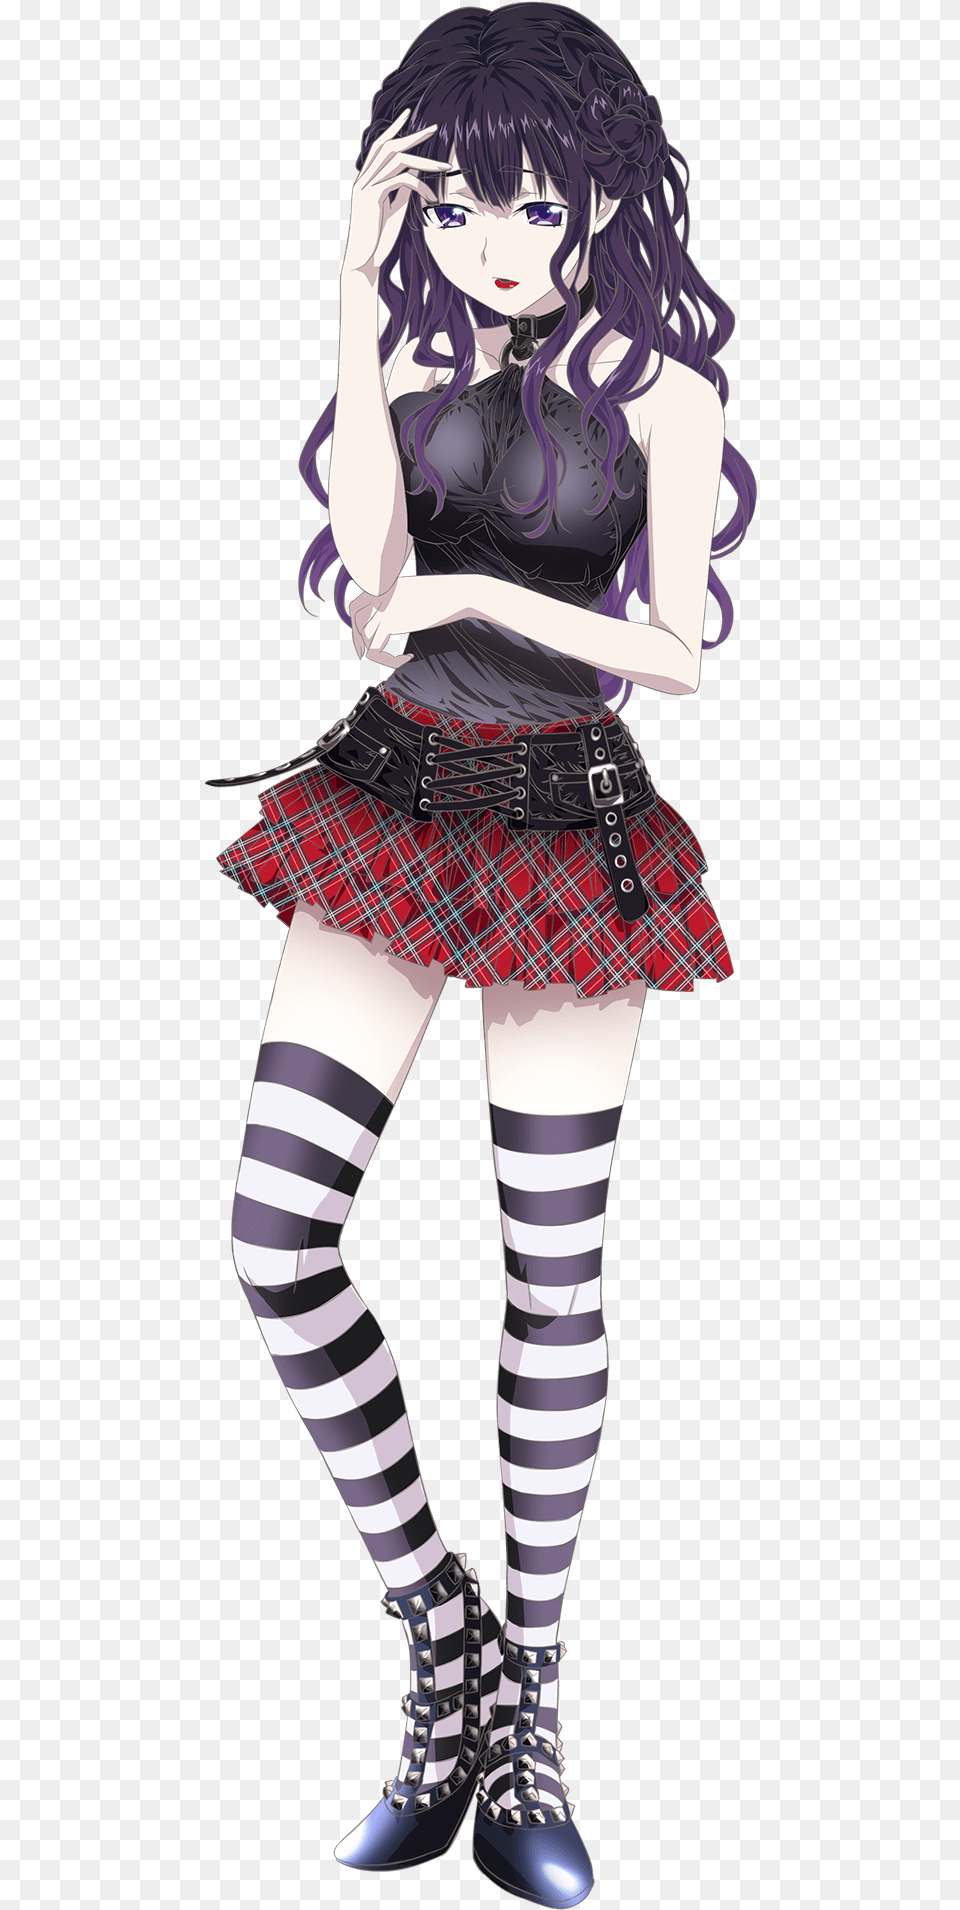 Anime Hand Shakers Characters Anime Hand Shakers Bind, Book, Skirt, Clothing, Comics Free Png Download